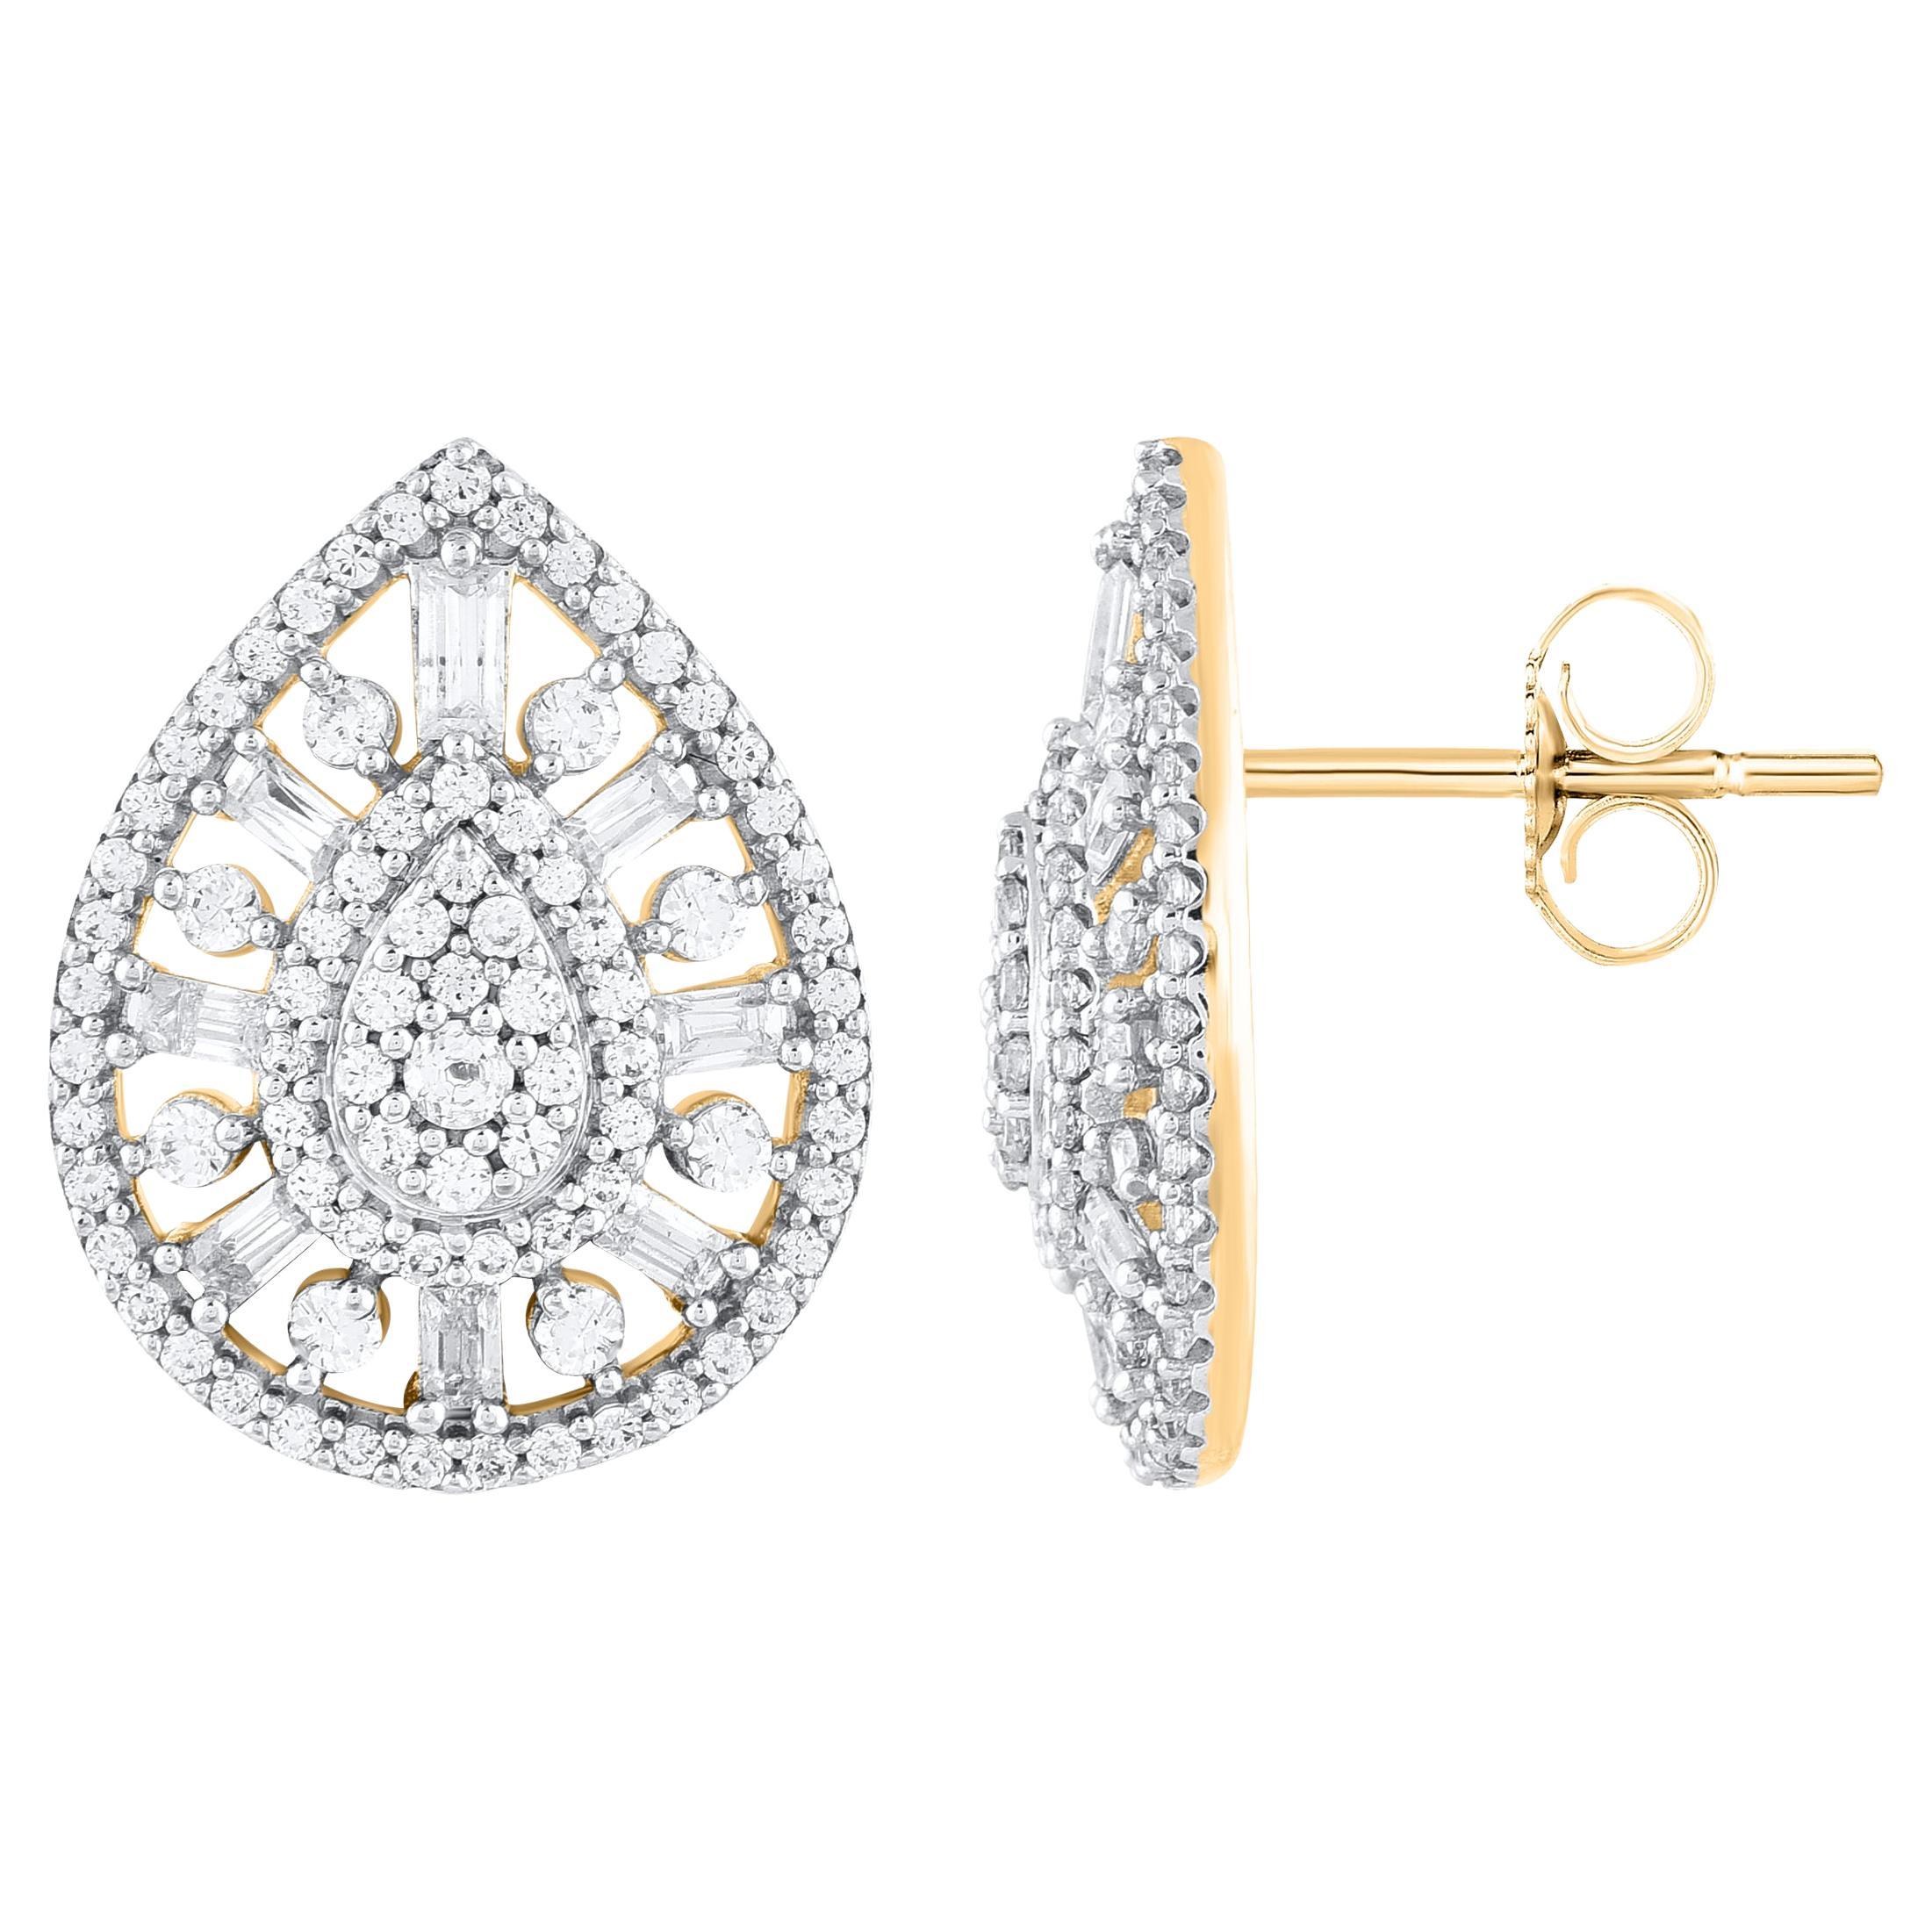 Adorn your formal wear with extra glitz when you put on these diamond frame stud earrings. Expertly crafted in 14 karat Yellow Gold, earring is cleverly filled with 176 single cut, brilliant cut round diamonds and baguette diamonds in prong & half